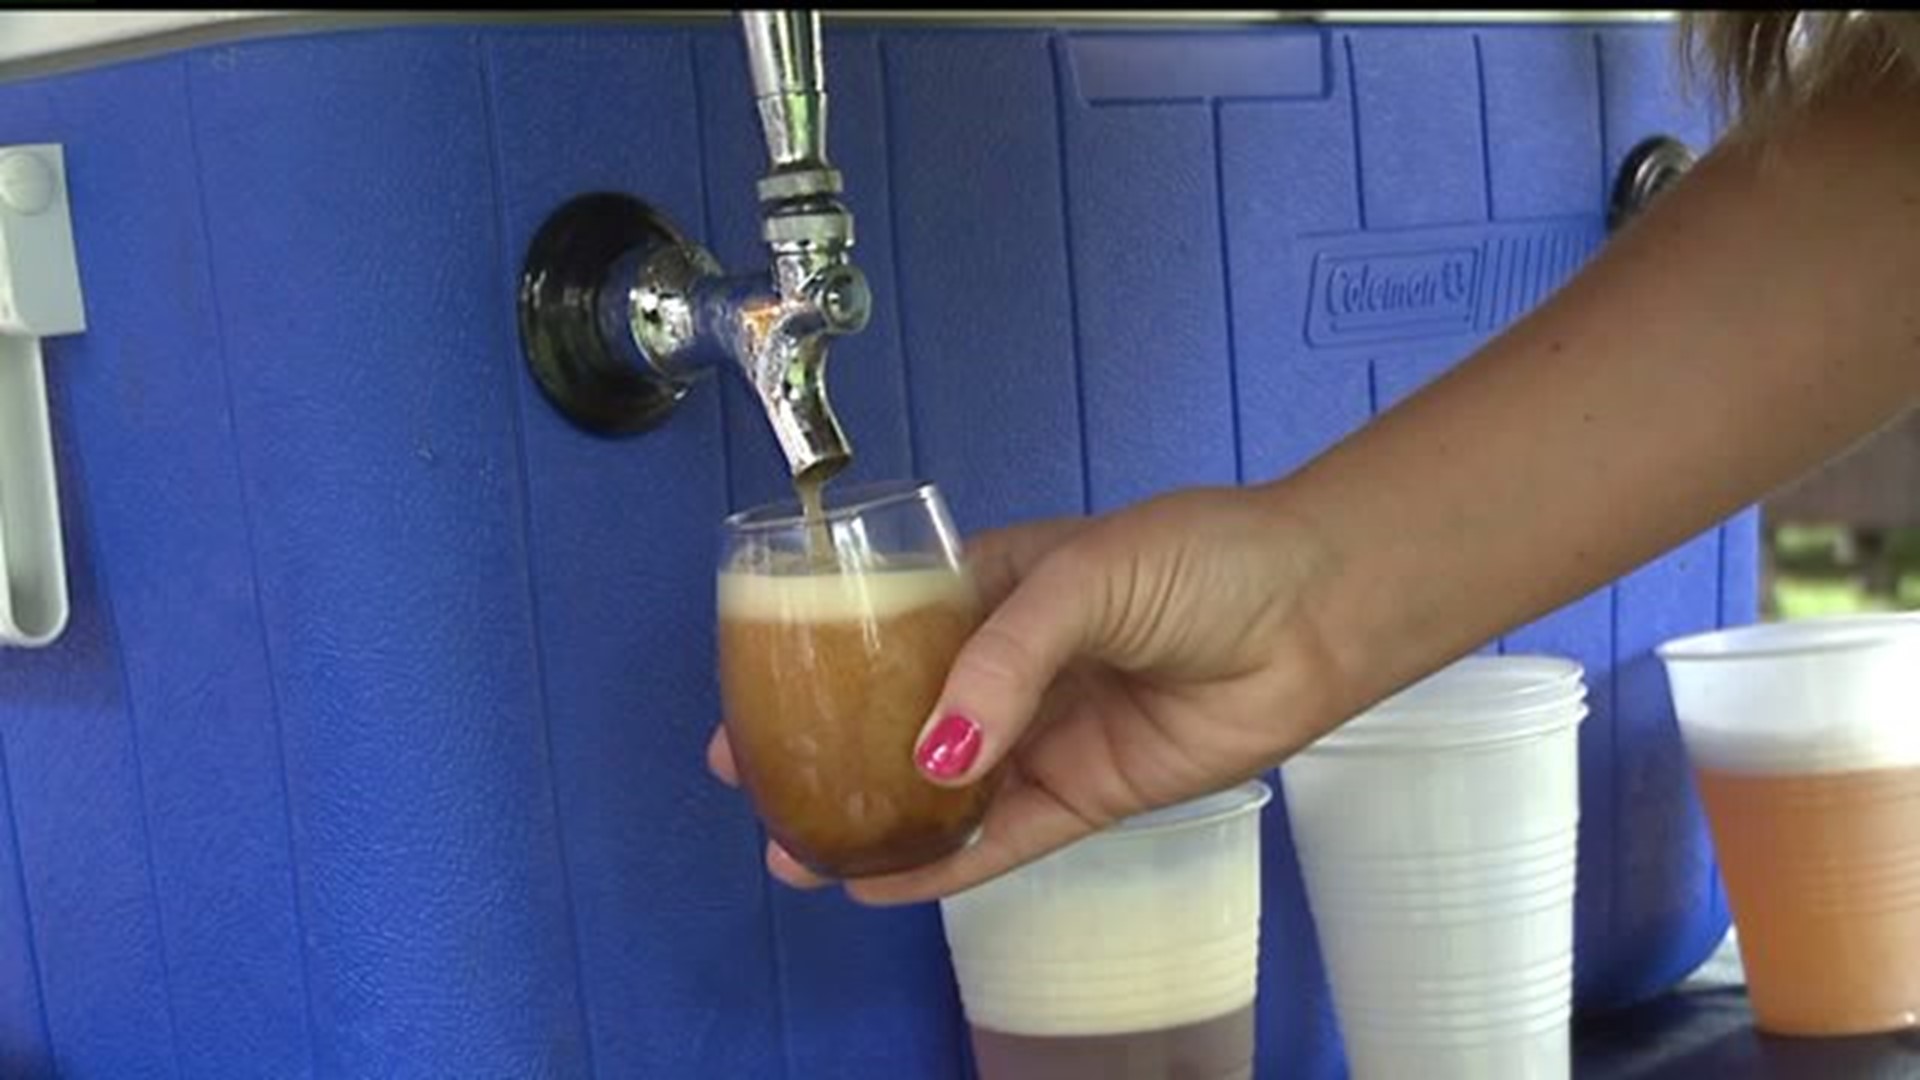 The fifth annual Brewfest is going on this weekend in Susquehanna Township